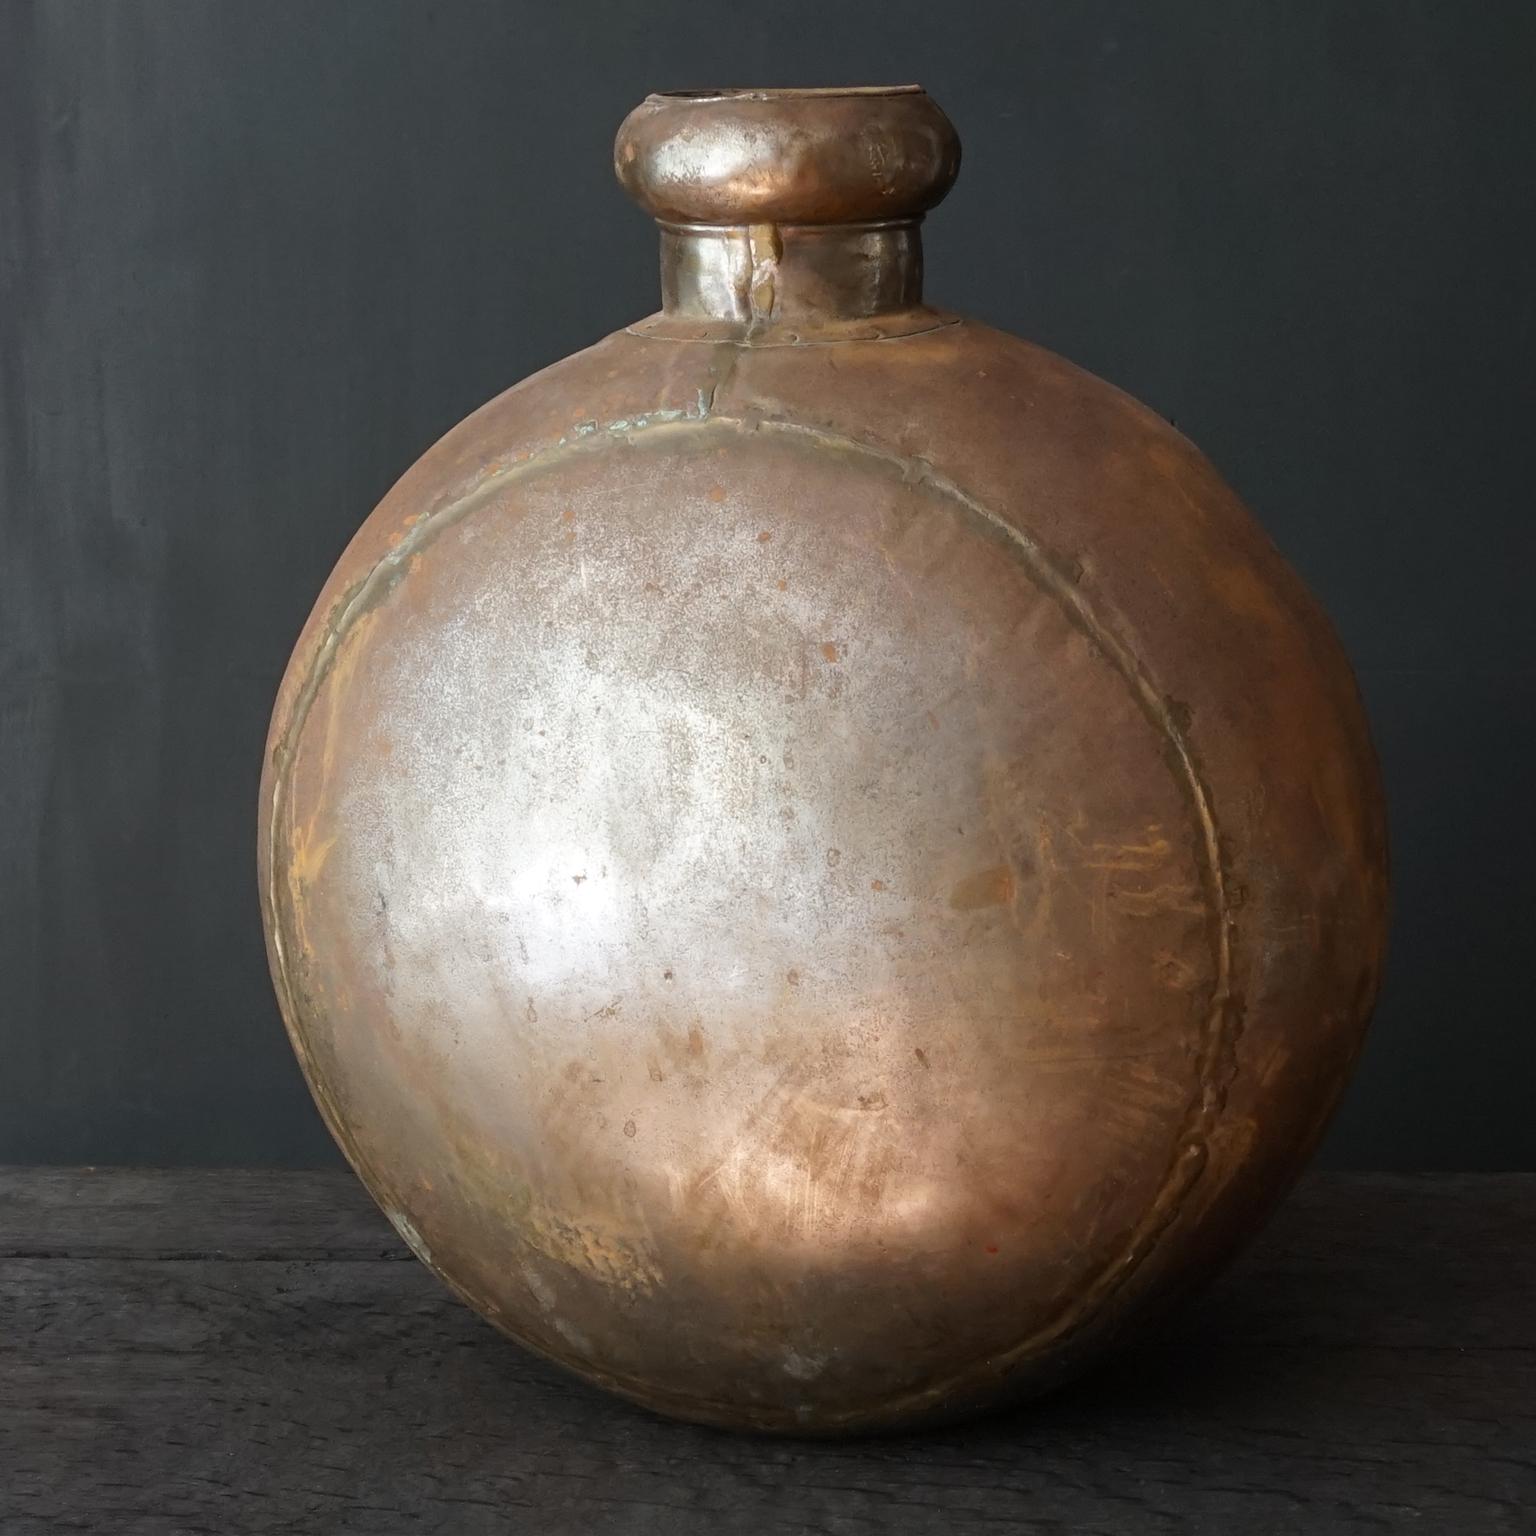 1950s Indian Hand-Hammered Large Metal Water Jug or Bottle with Wooden Cork For Sale 2